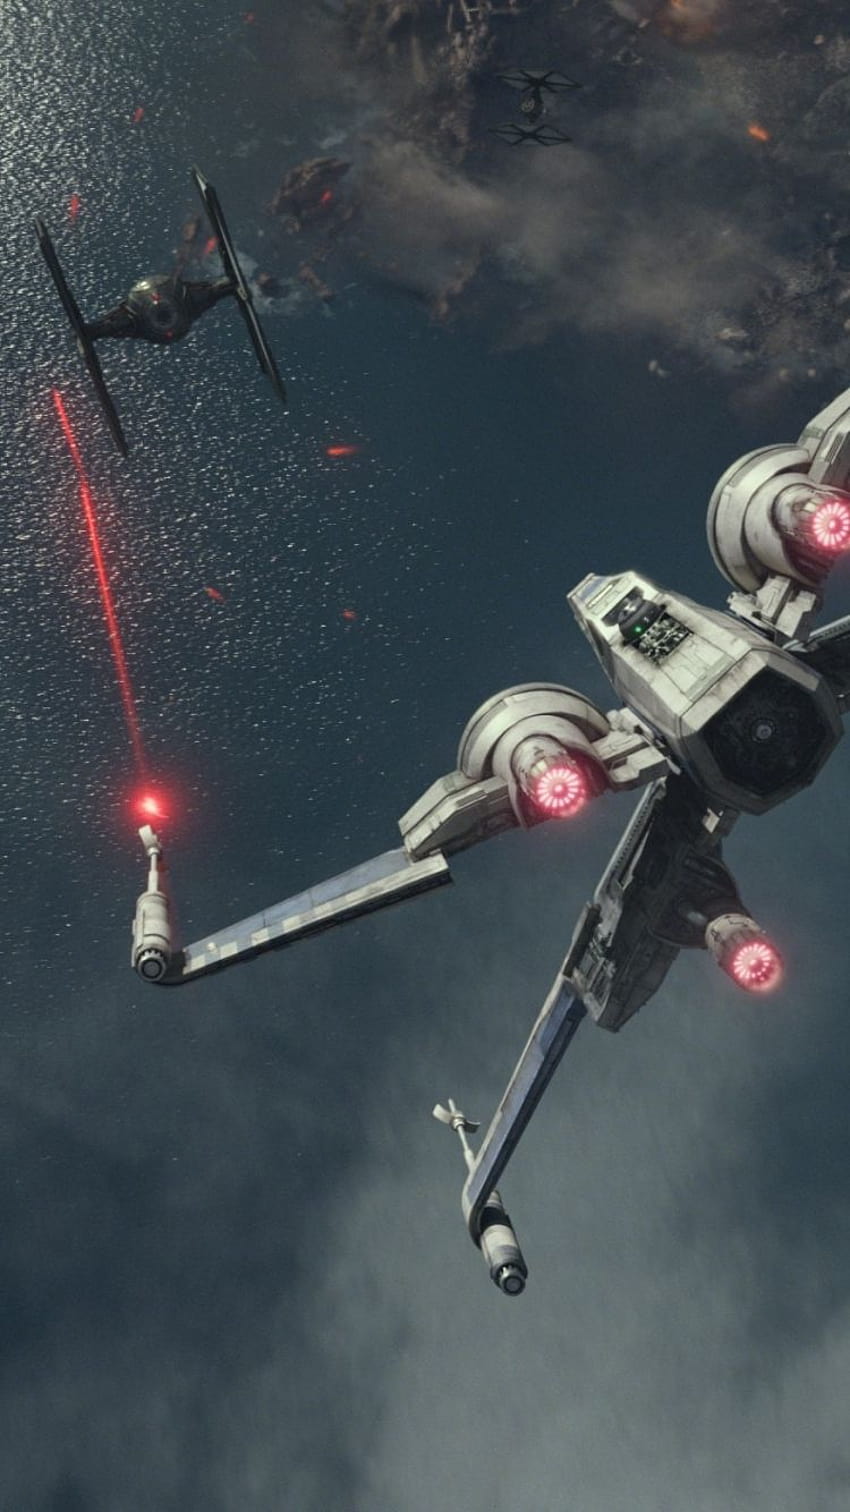 Star Wars X Wing Iphone, tie fighter cockpit iphone HD phone wallpaper